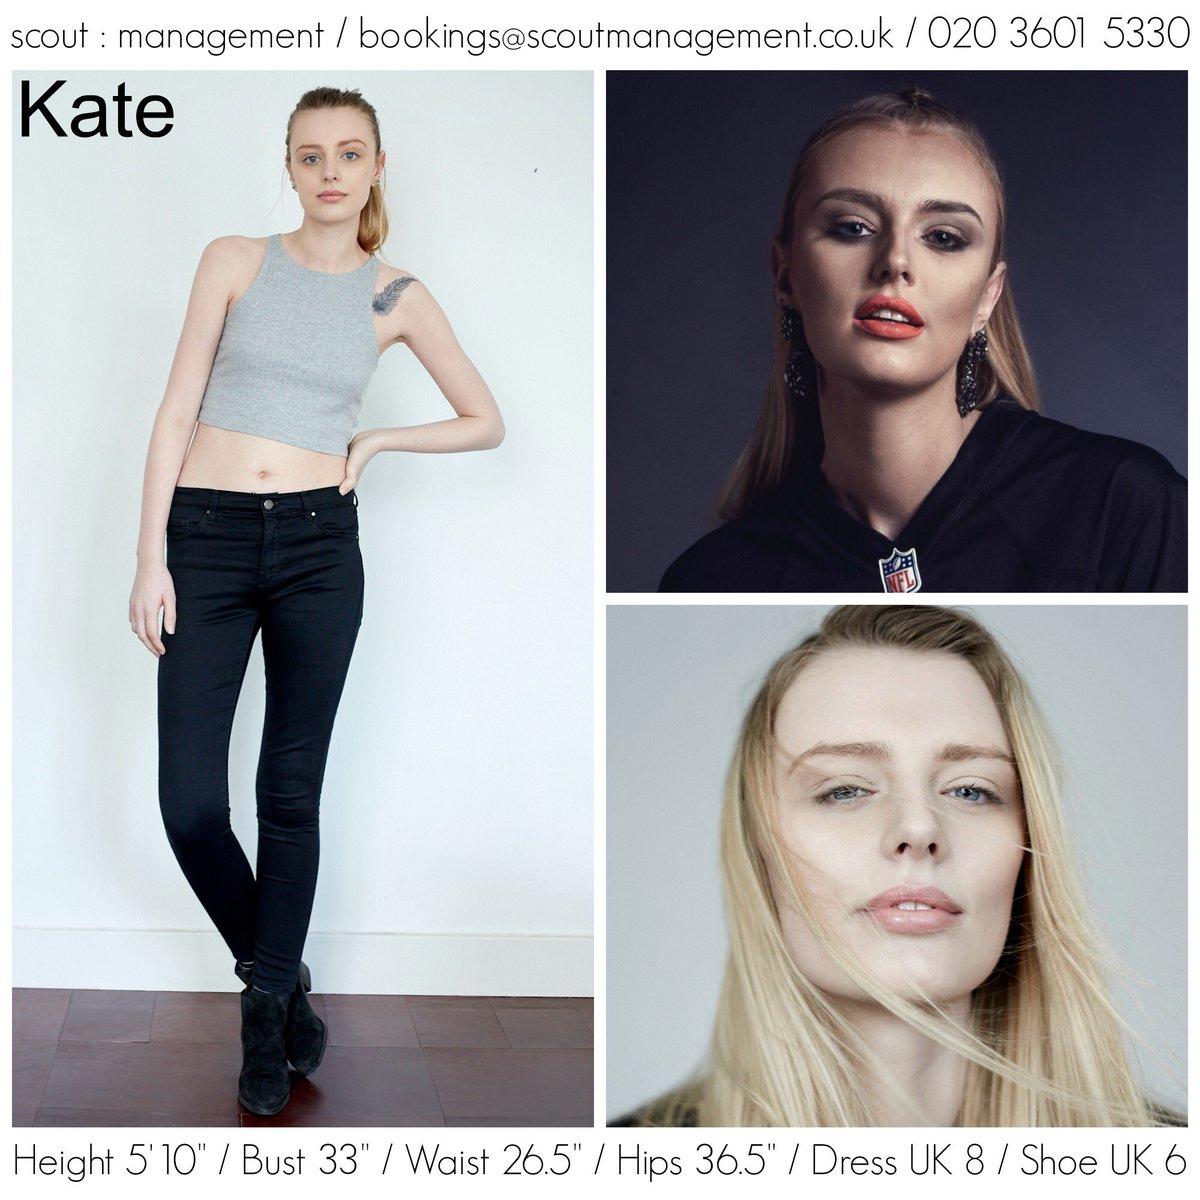 Non-stop at the agency. Meetings and signings on a Saturday, including catching up with #newface KATE / #londonmodelagency #scoutmemodel